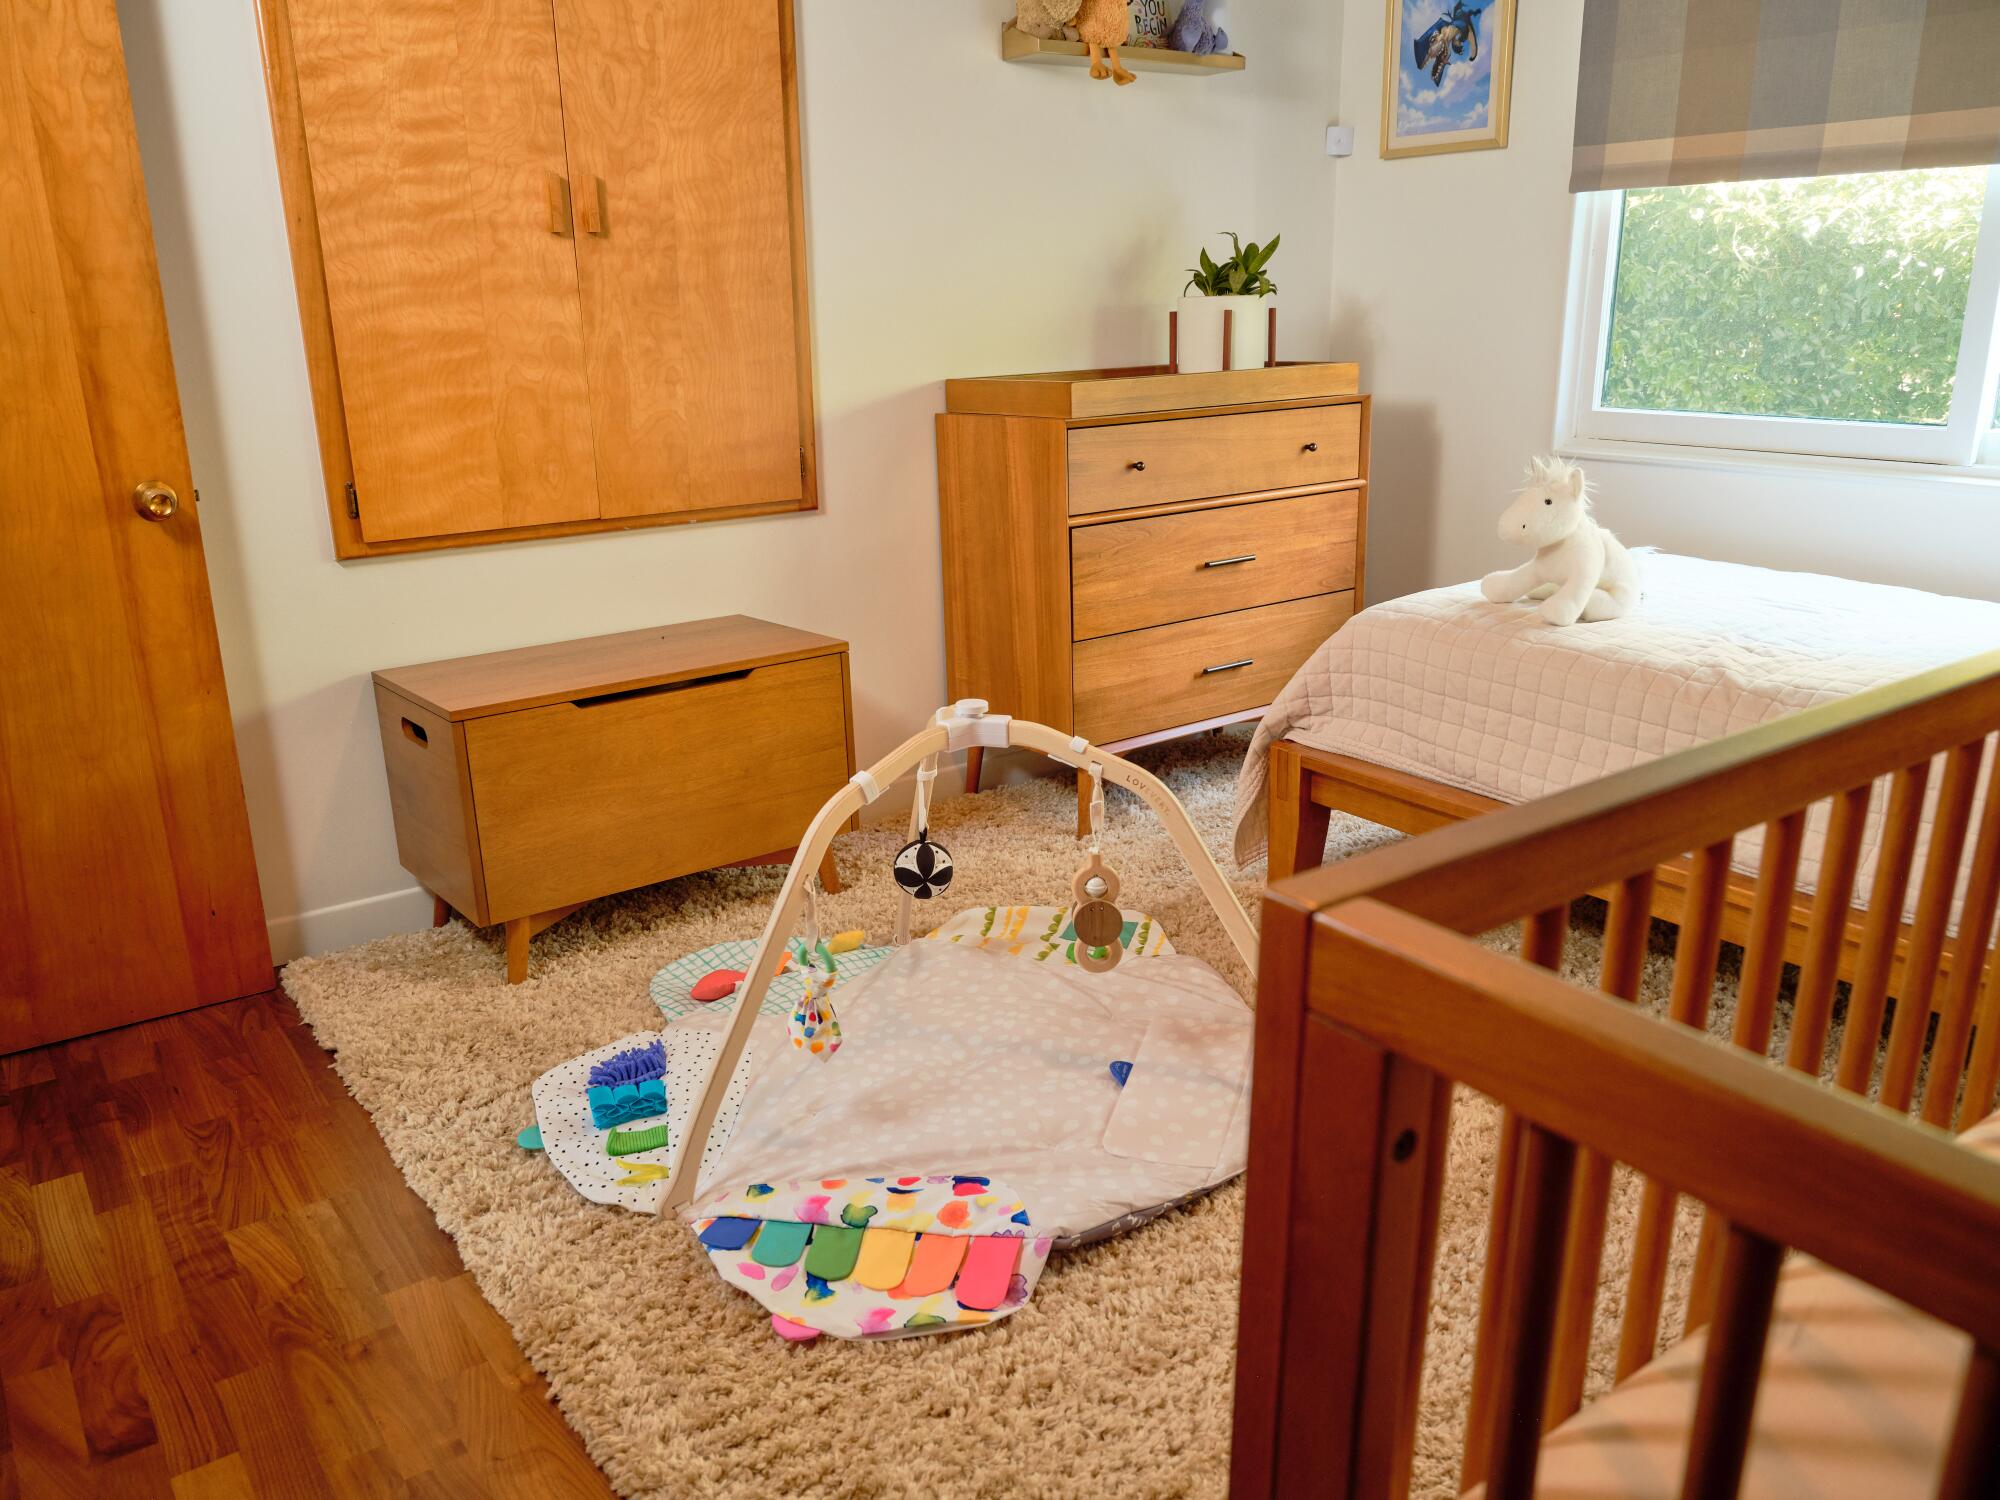 A crib and baby mat in the guest room filled with light wood furniture.